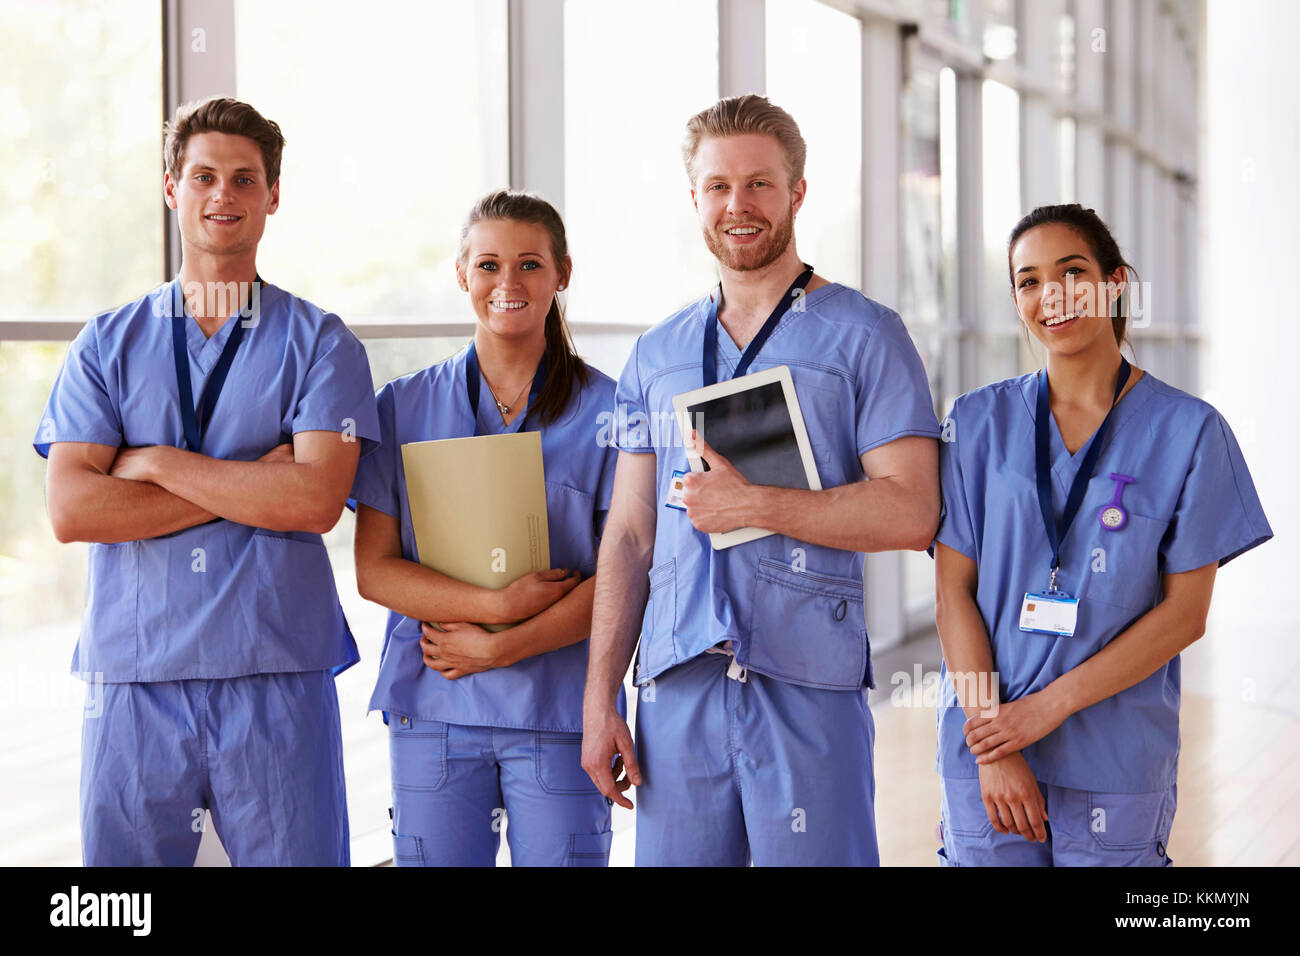 Group portrait of healthcare workers in hospital corridor Stock Photo